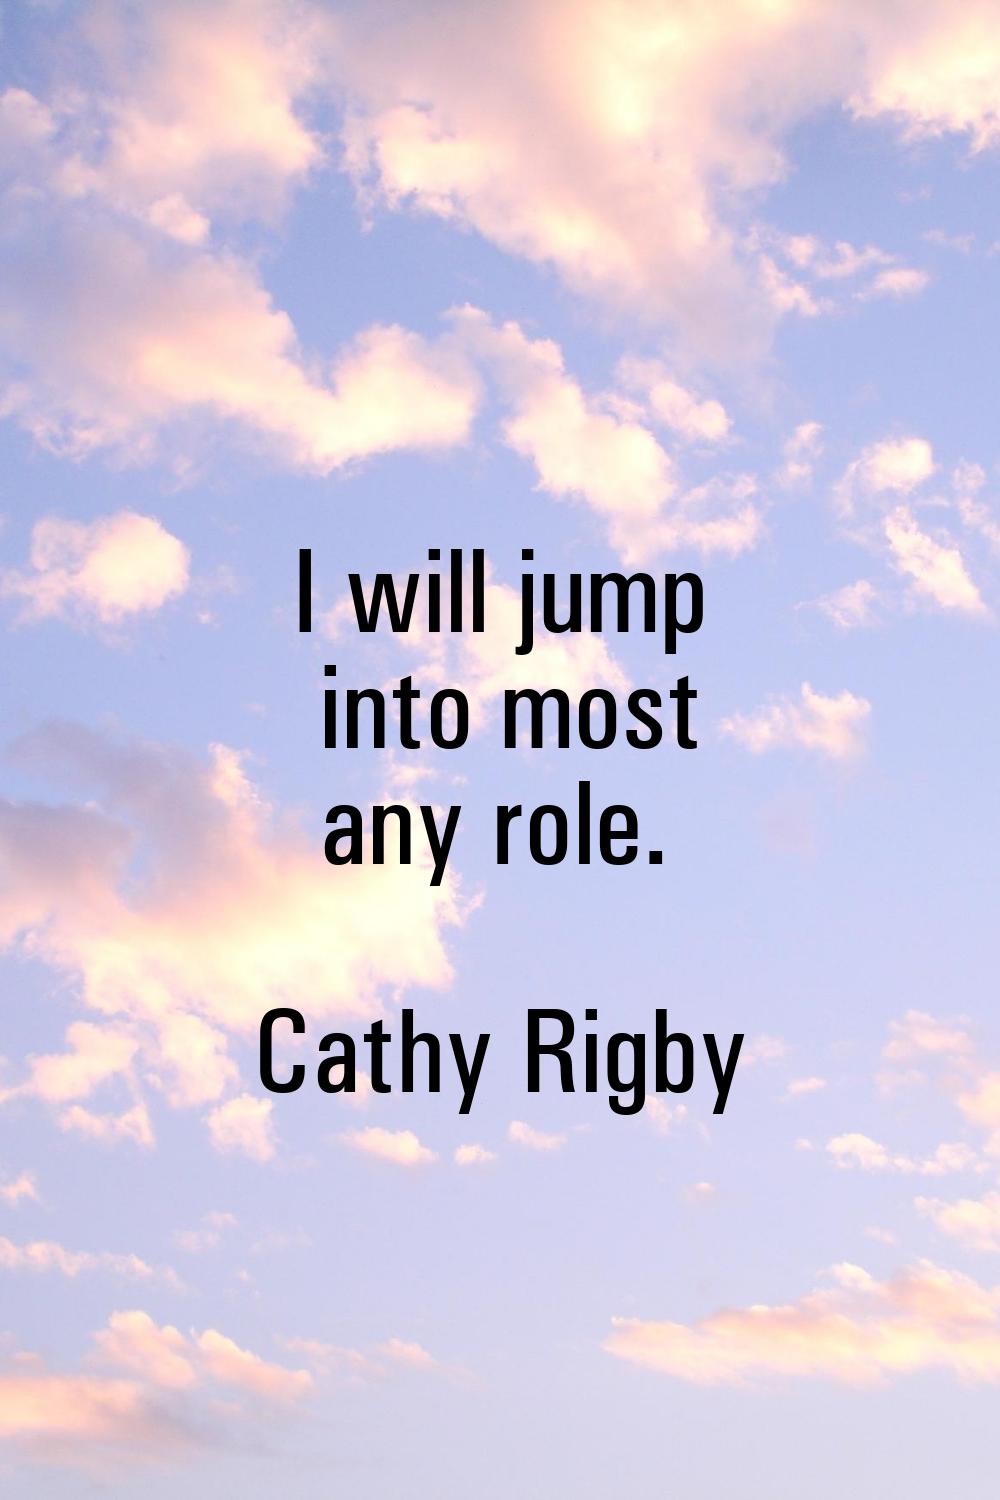 I will jump into most any role.